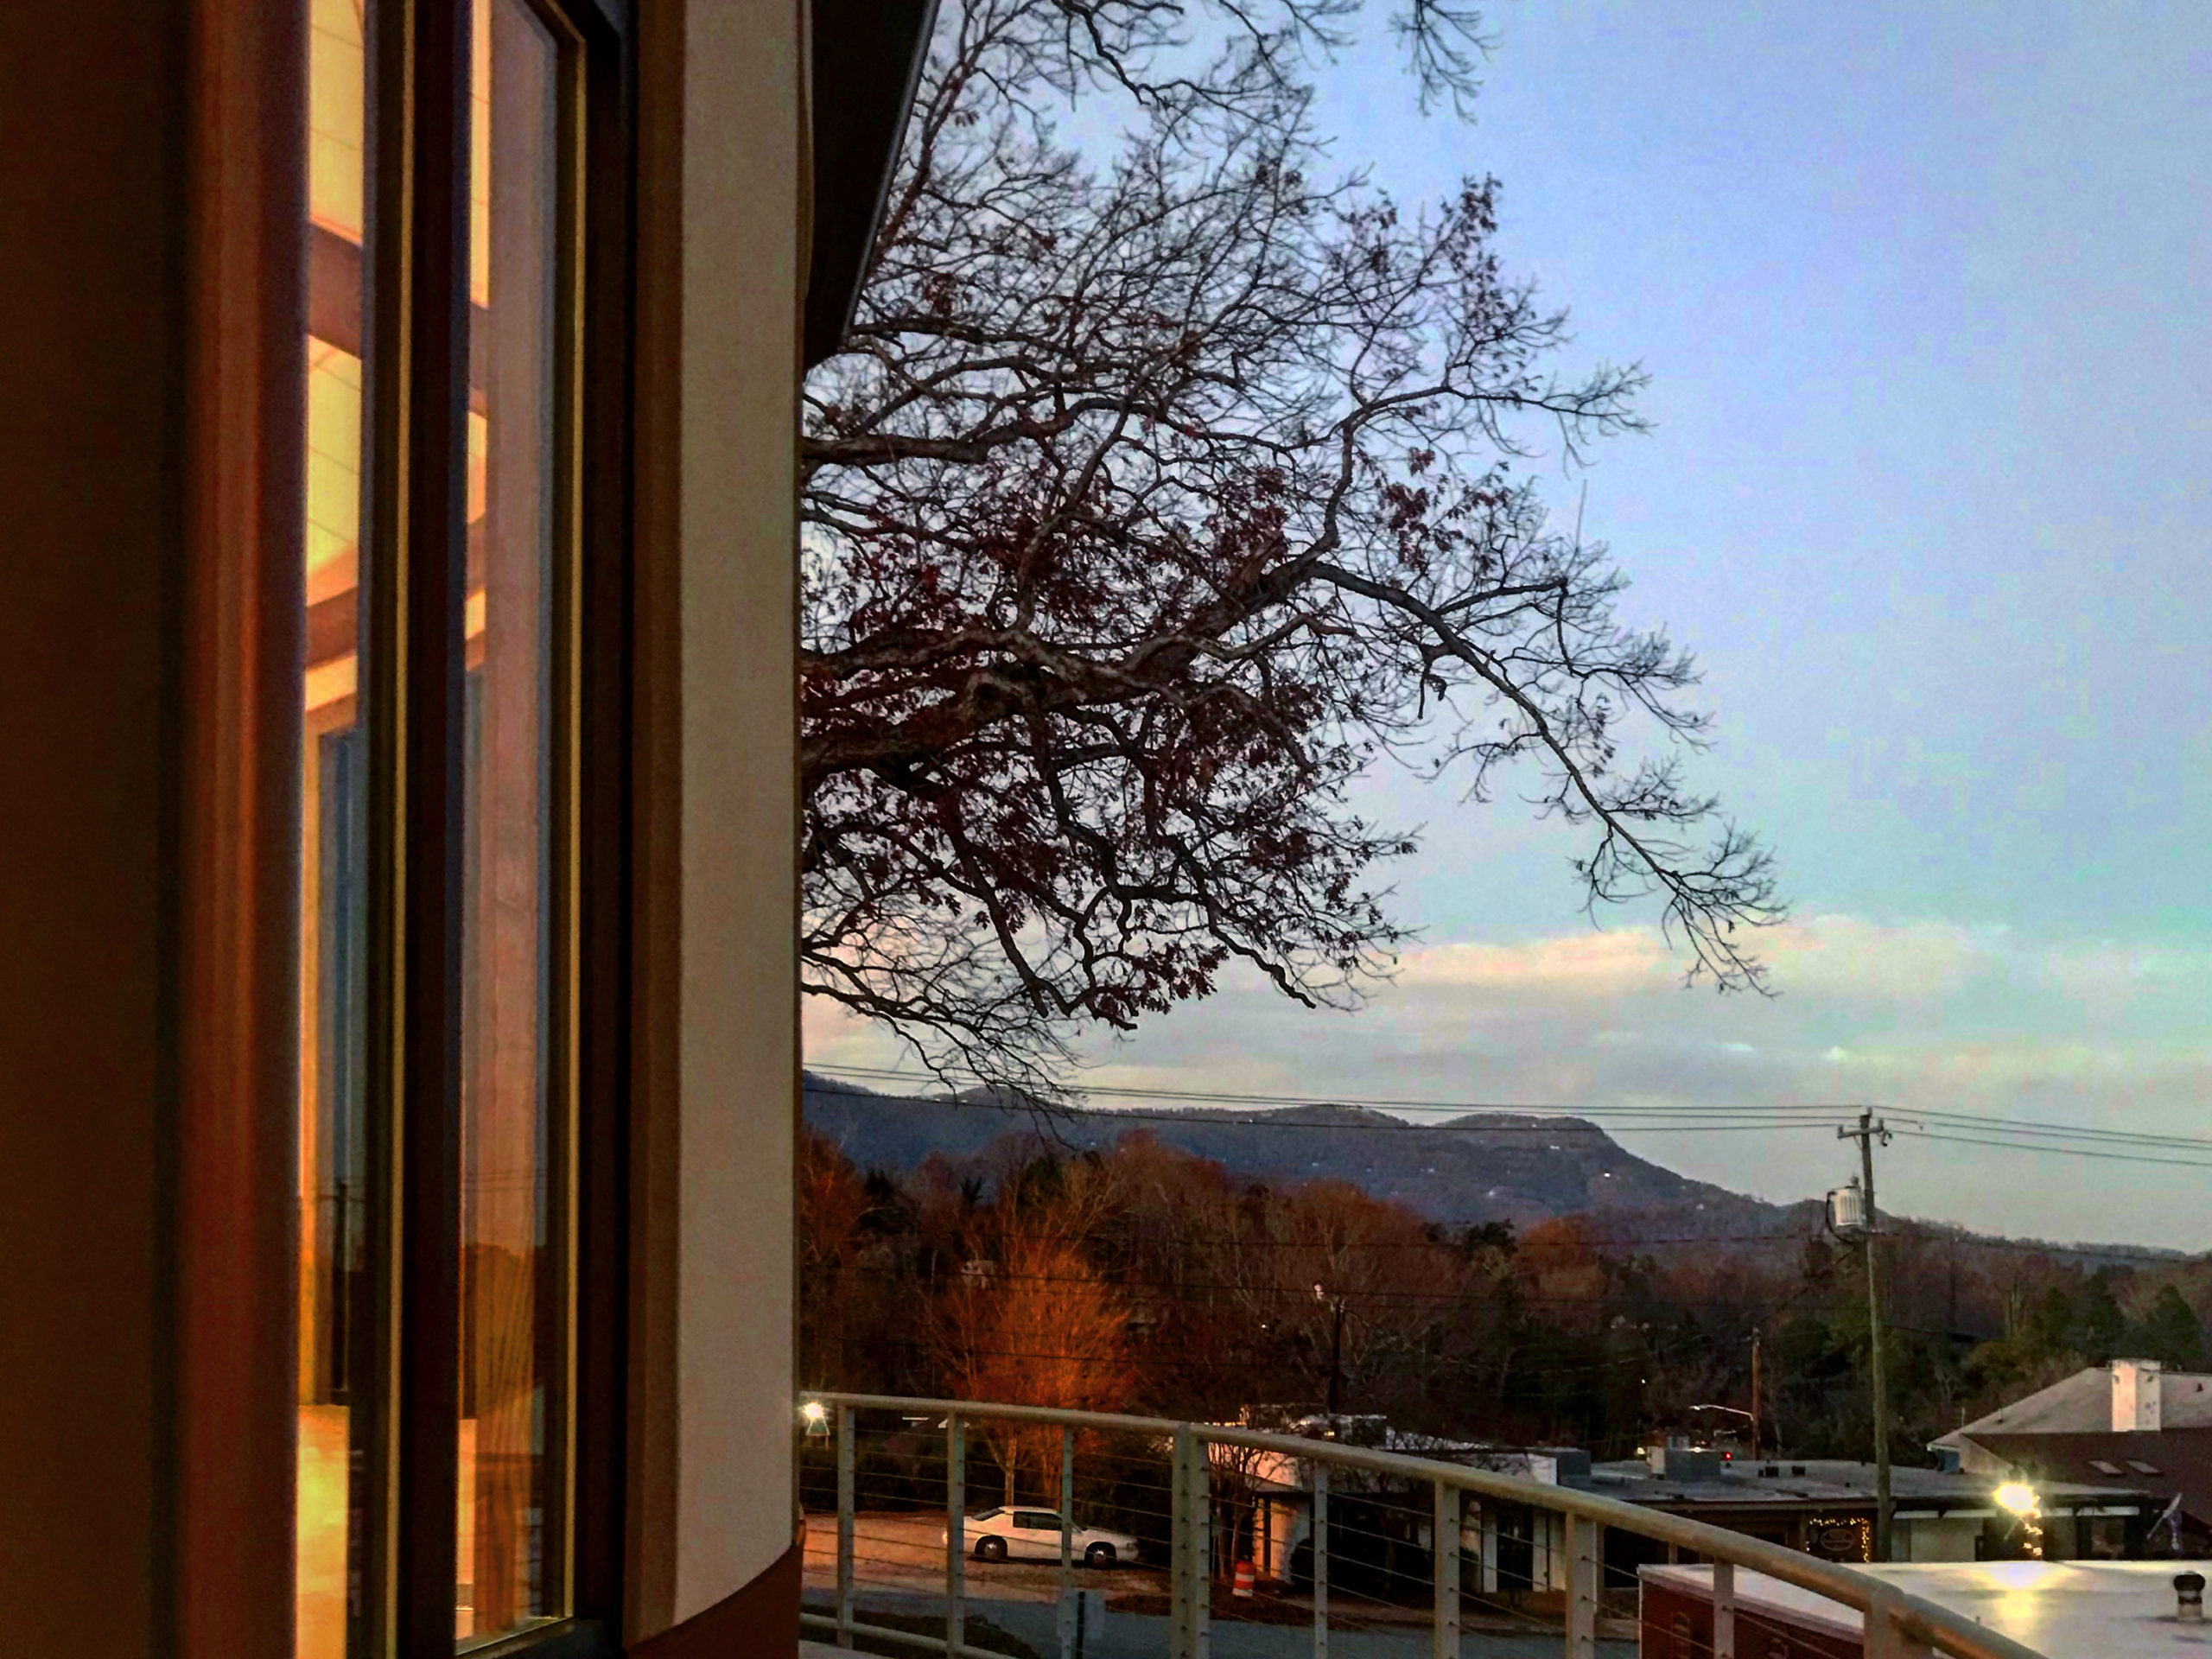 View from the curved addition westward toward the mountains.